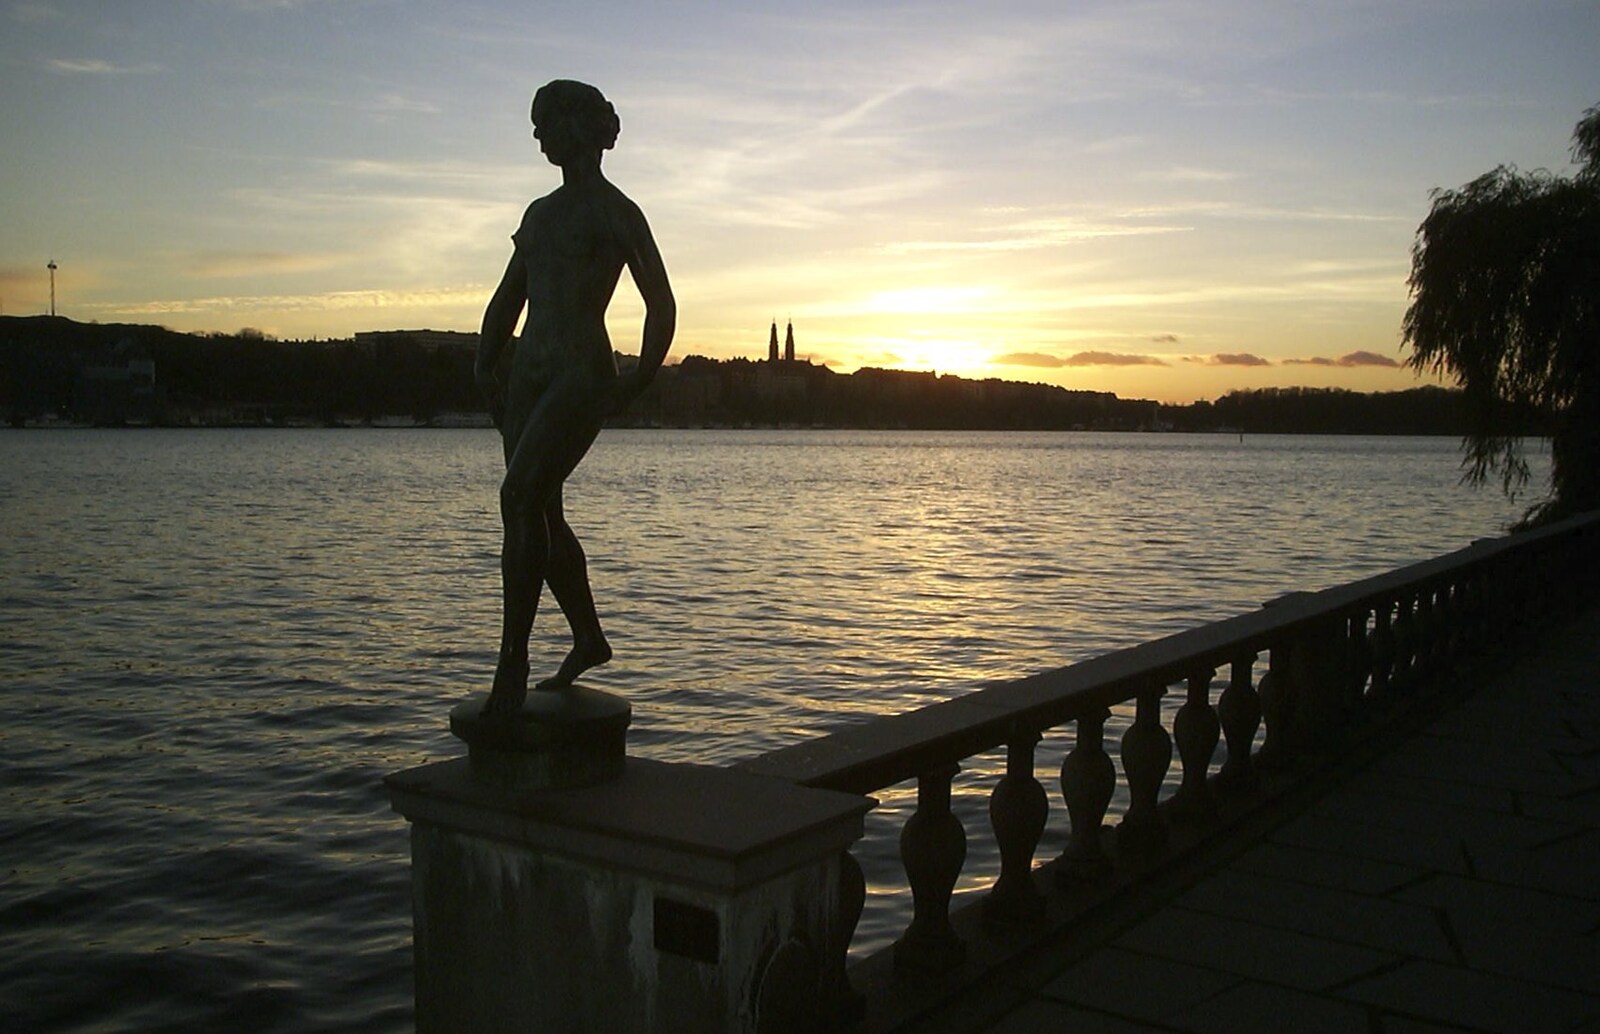 The naked statue in the sunset from A 3G Lab Press Tour of Helsinki and Stockholm, Finland and Sweden - 12th March 2001